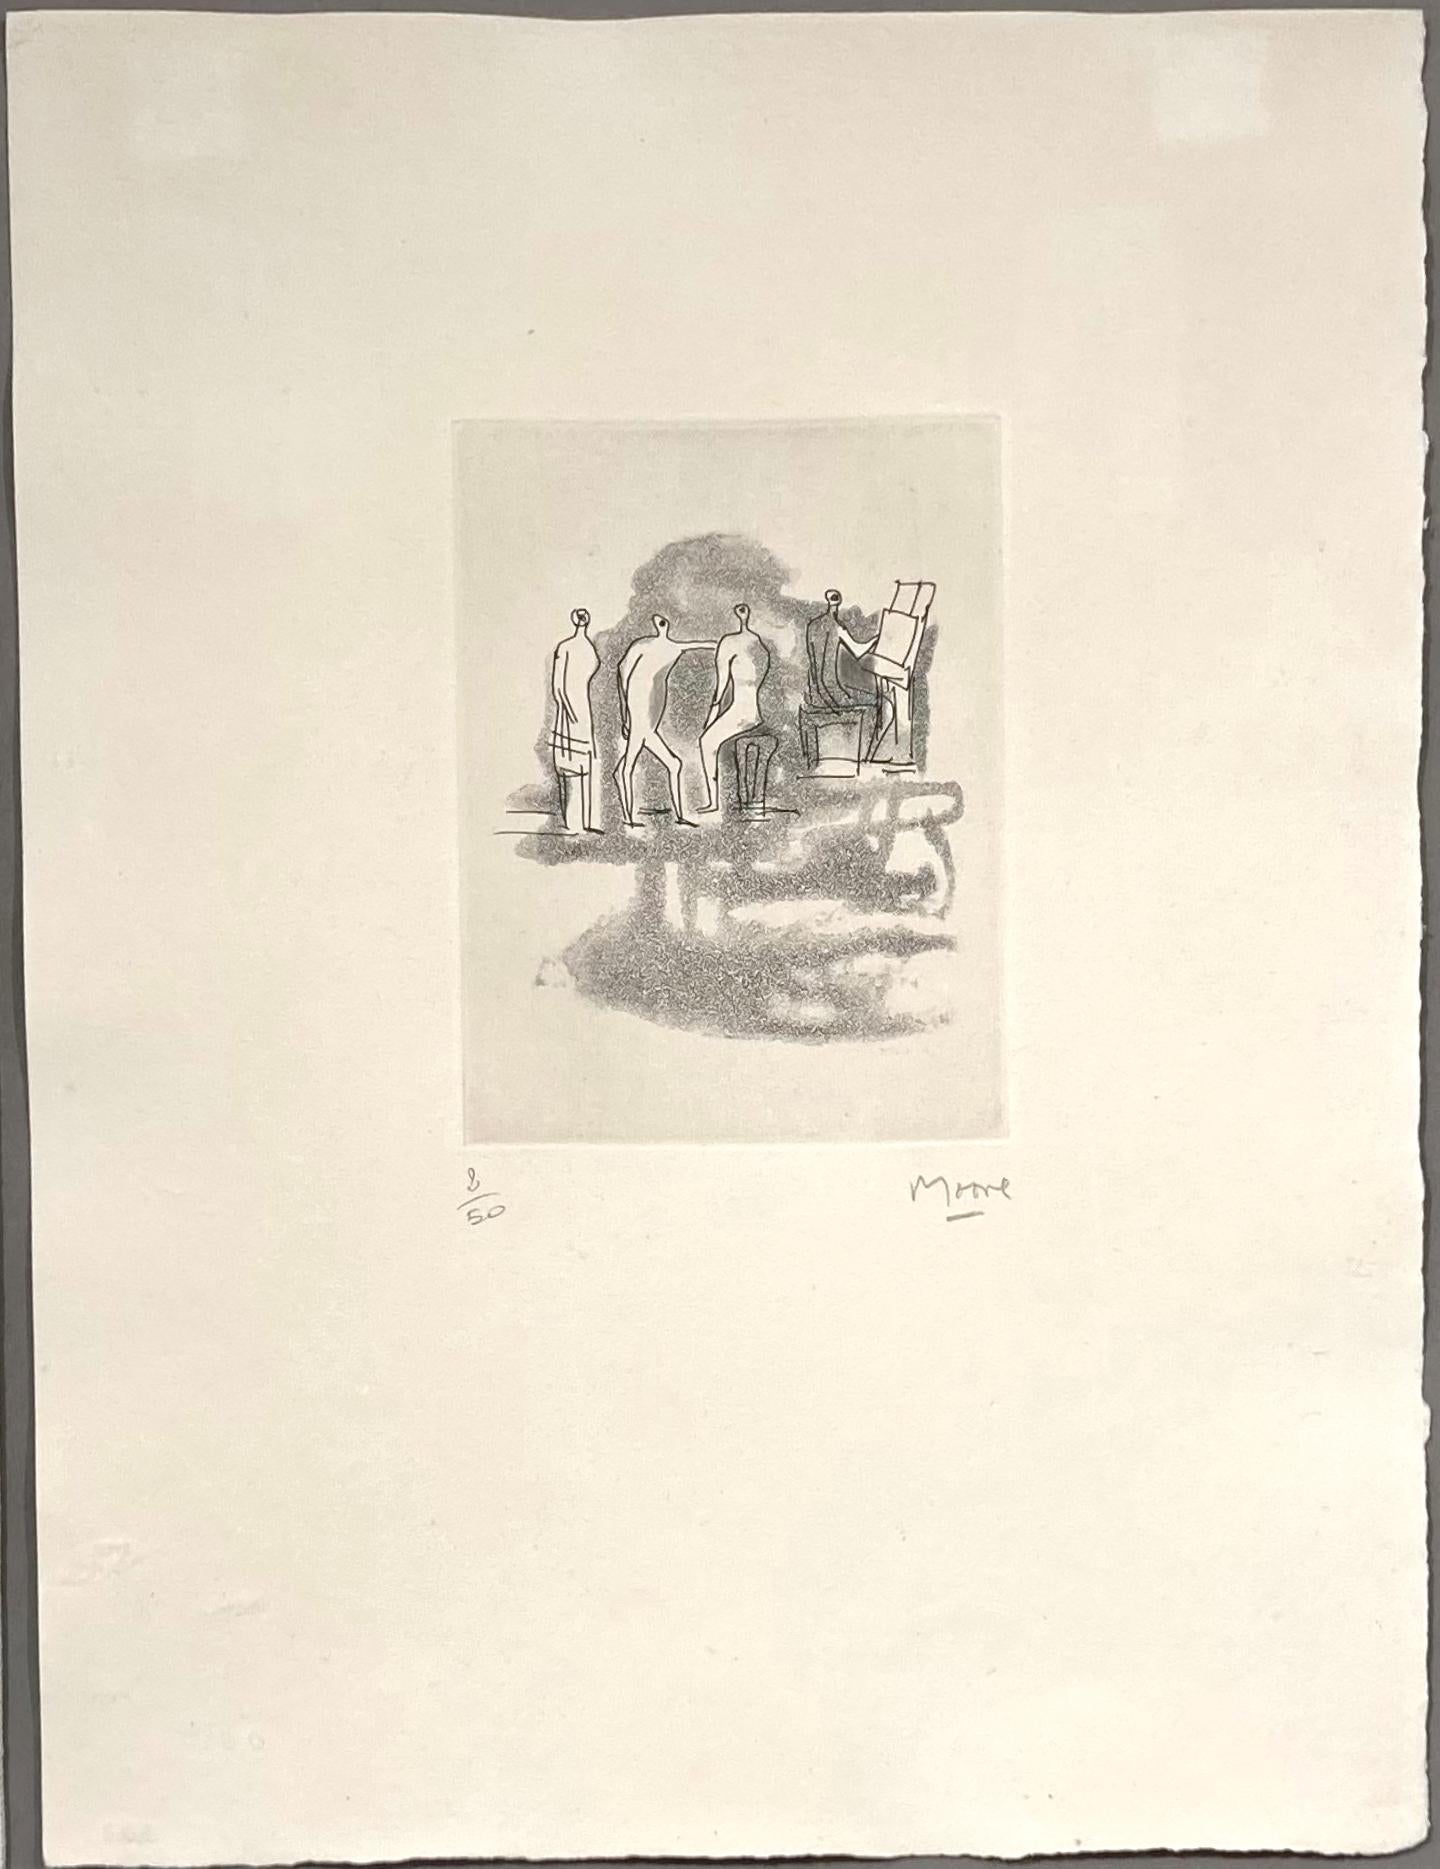 Concerto - Print by Henry Moore